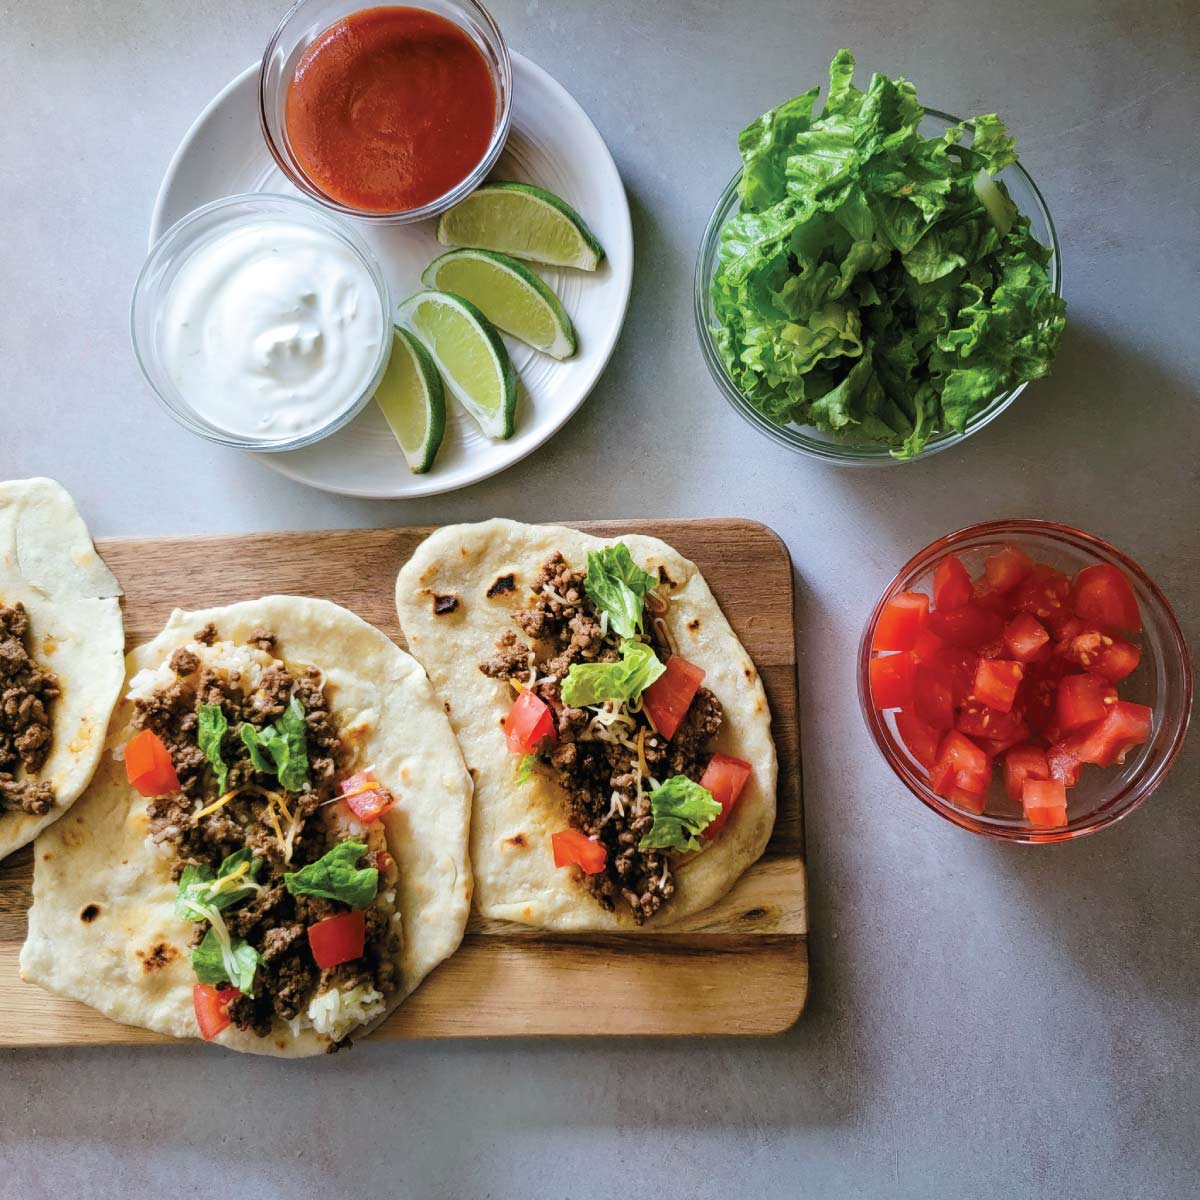 Soft tacos made with homemade tortillas on a serving board with diced tomatoes, cut lettuce, lime wedges, sour cream and taco sauce in bowls for toppings.